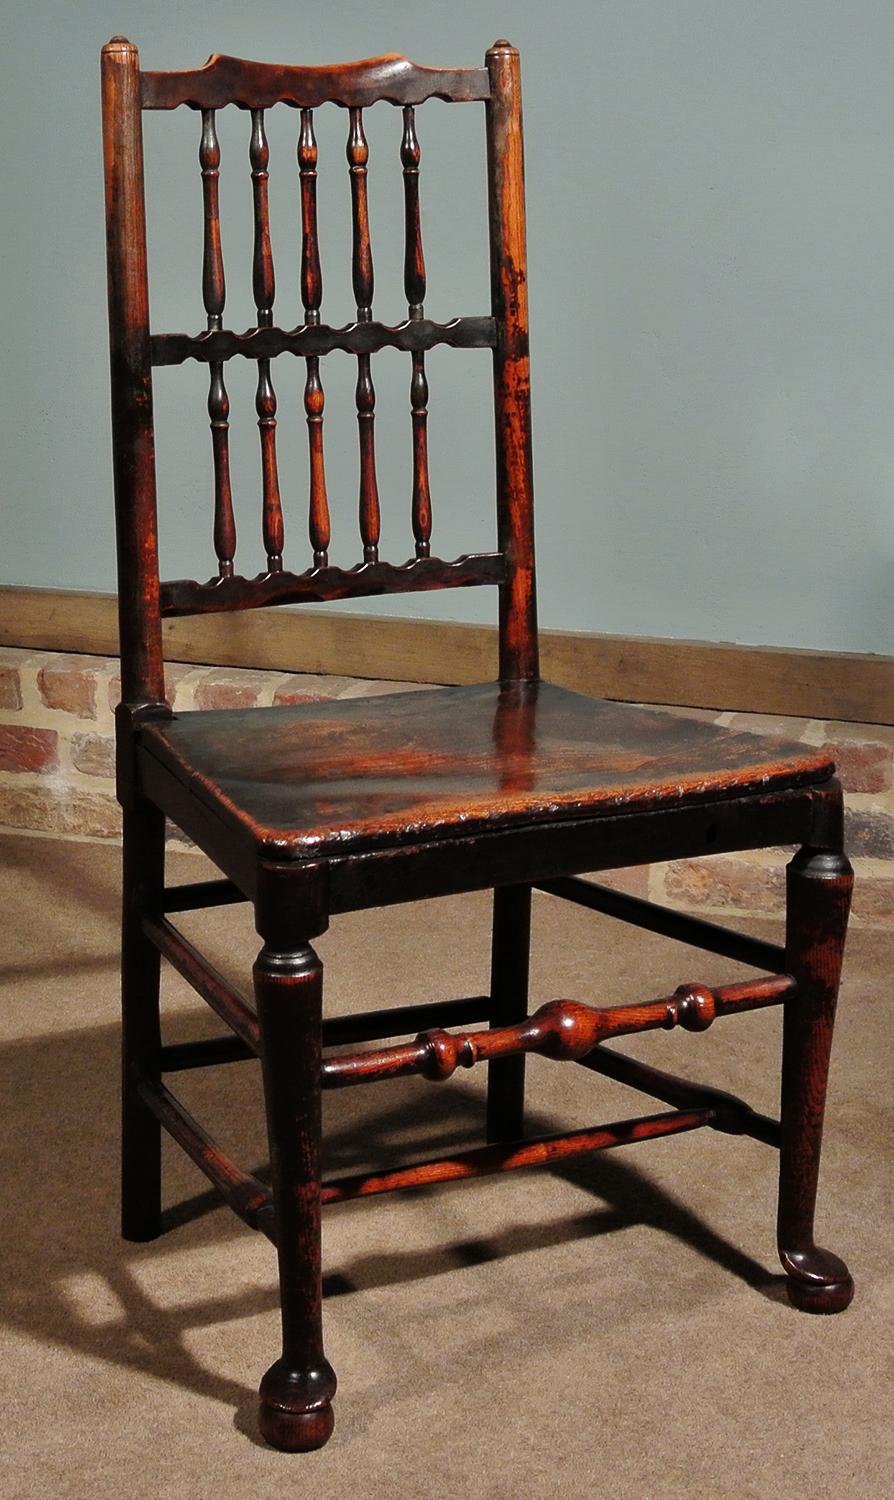 A very good pair of mid-18th century elm spindle back chairs. Of charming form and with a fantastic color and deep natural patination, the chairs are solid and robust and extremely eye-catching.

Original and complete spindles and stretchers, all